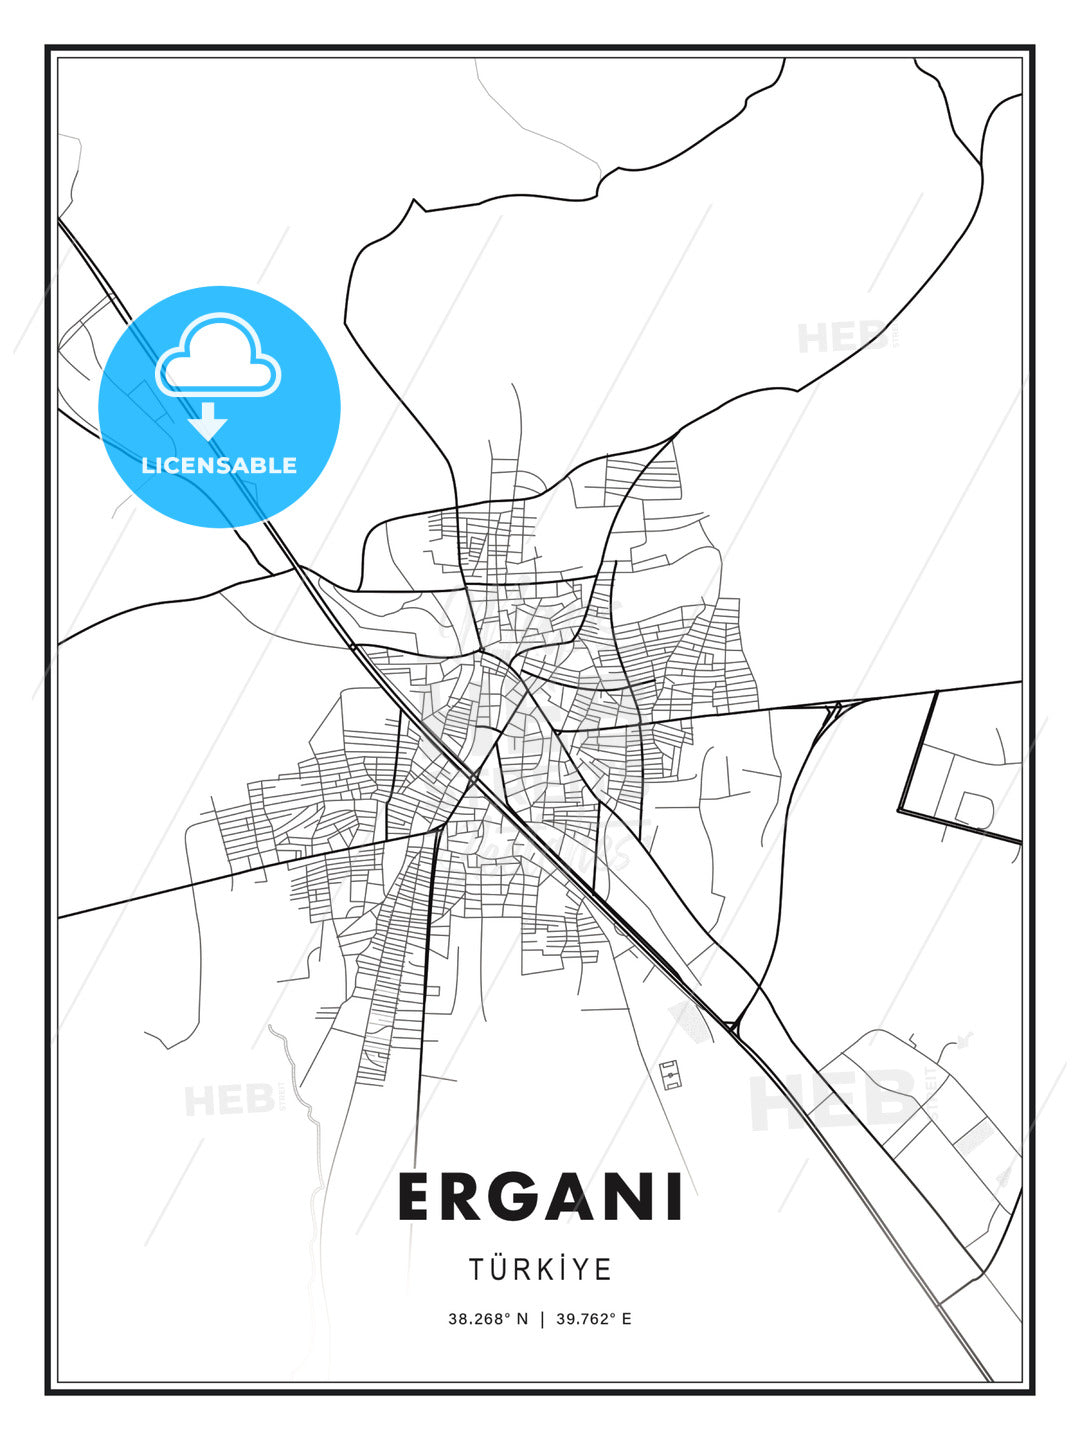 Ergani, Turkey, Modern Print Template in Various Formats - HEBSTREITS Sketches